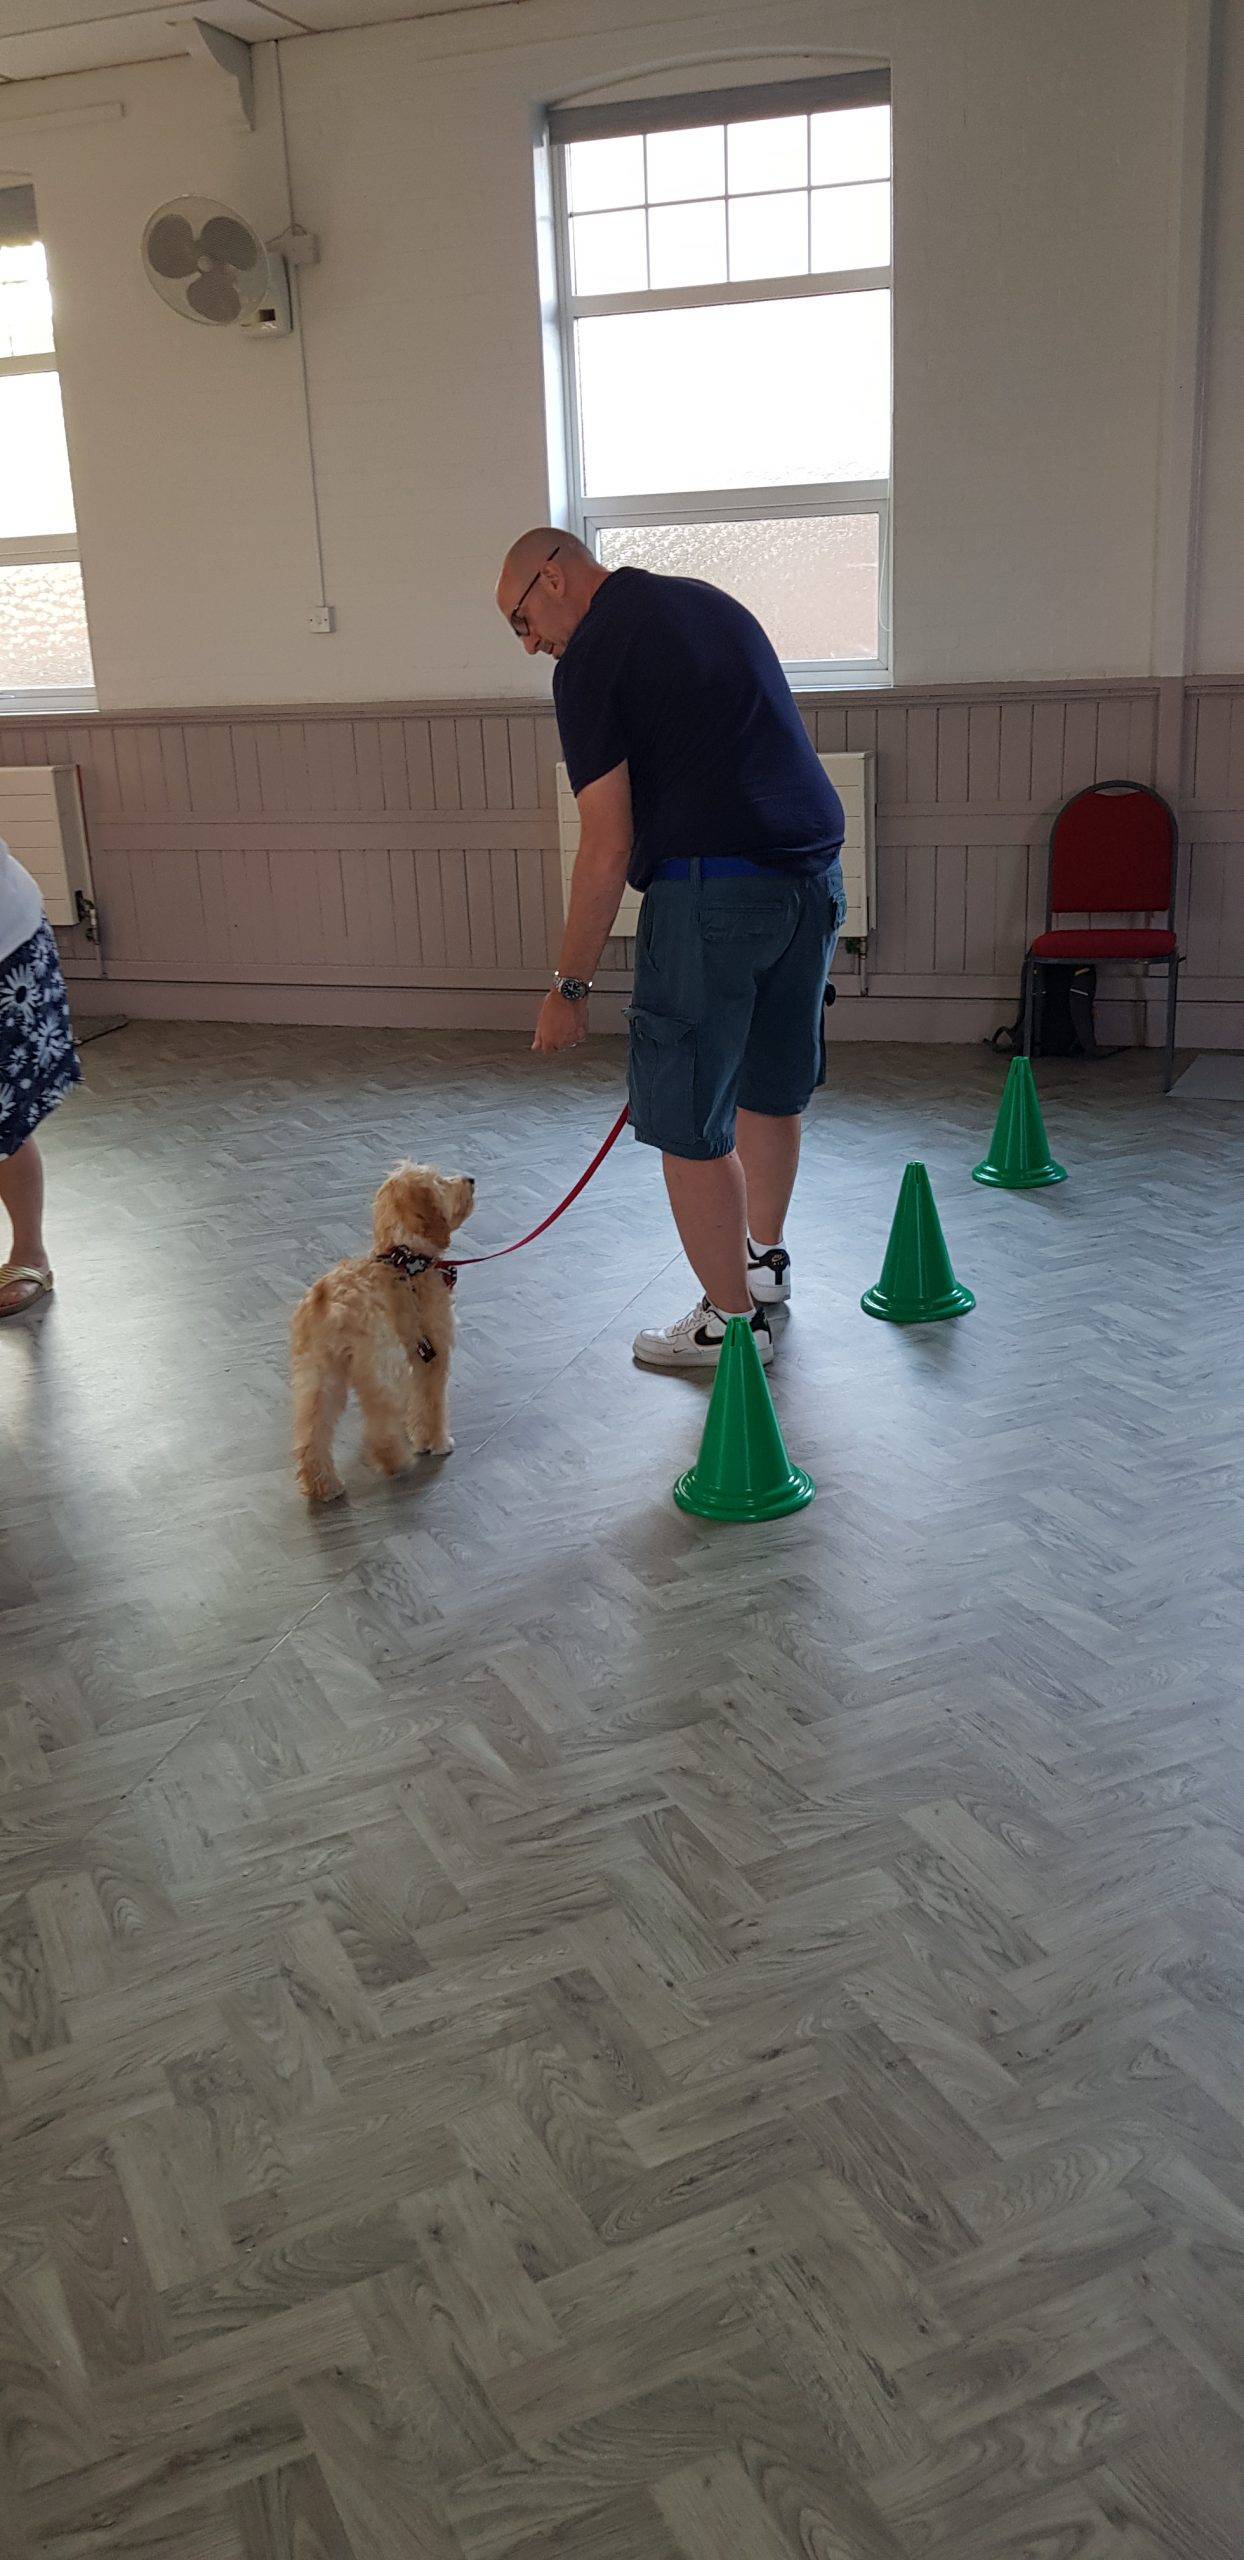 Group dog training class in action